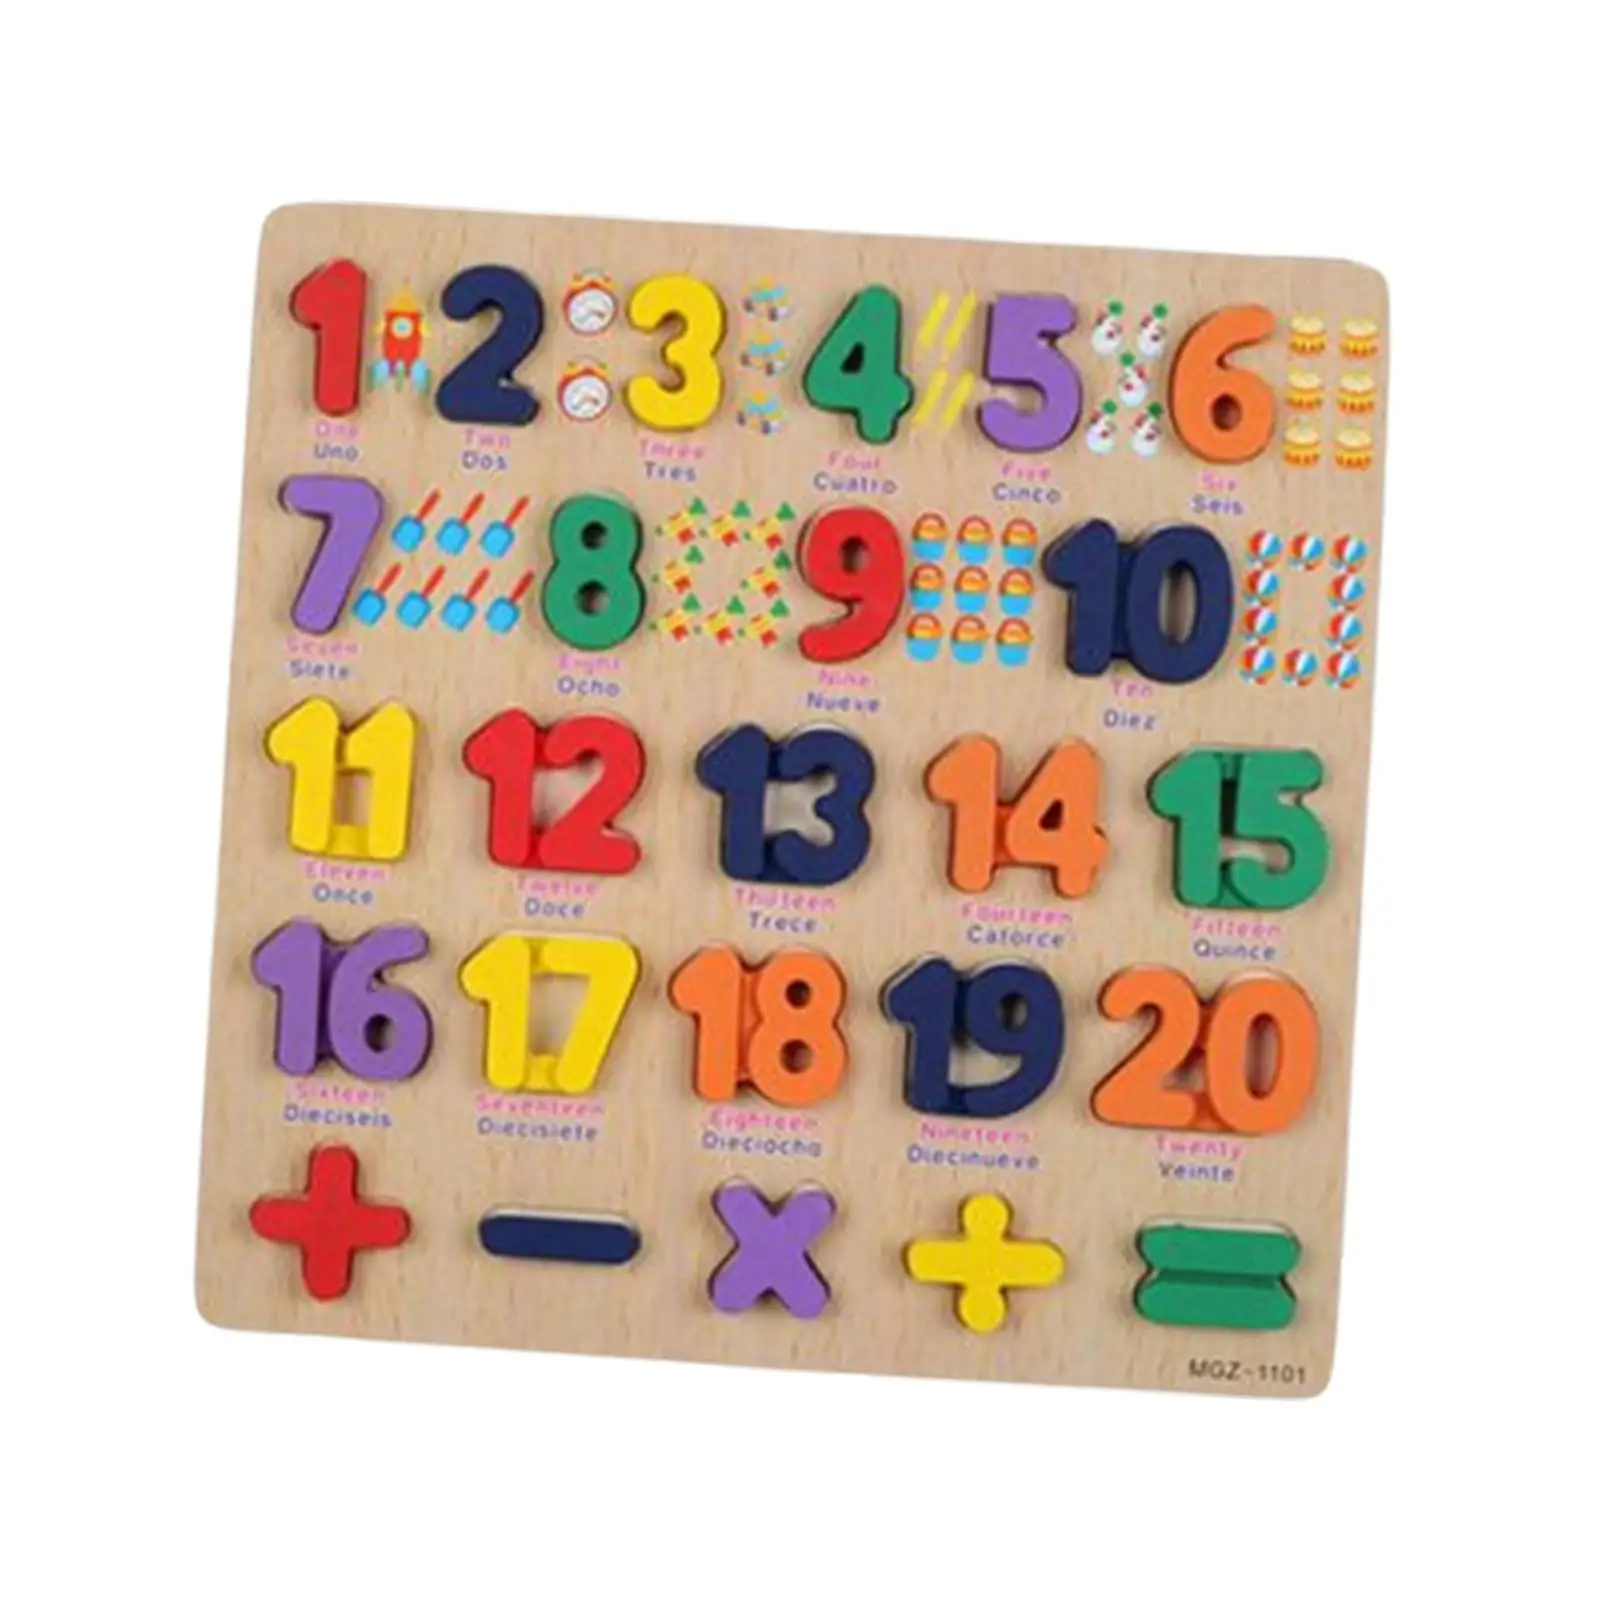 Spanish Blocks Jigsaw Wooden Pegged Puzzles Preschool Educational Toy Smooth Colors Holiday Gift